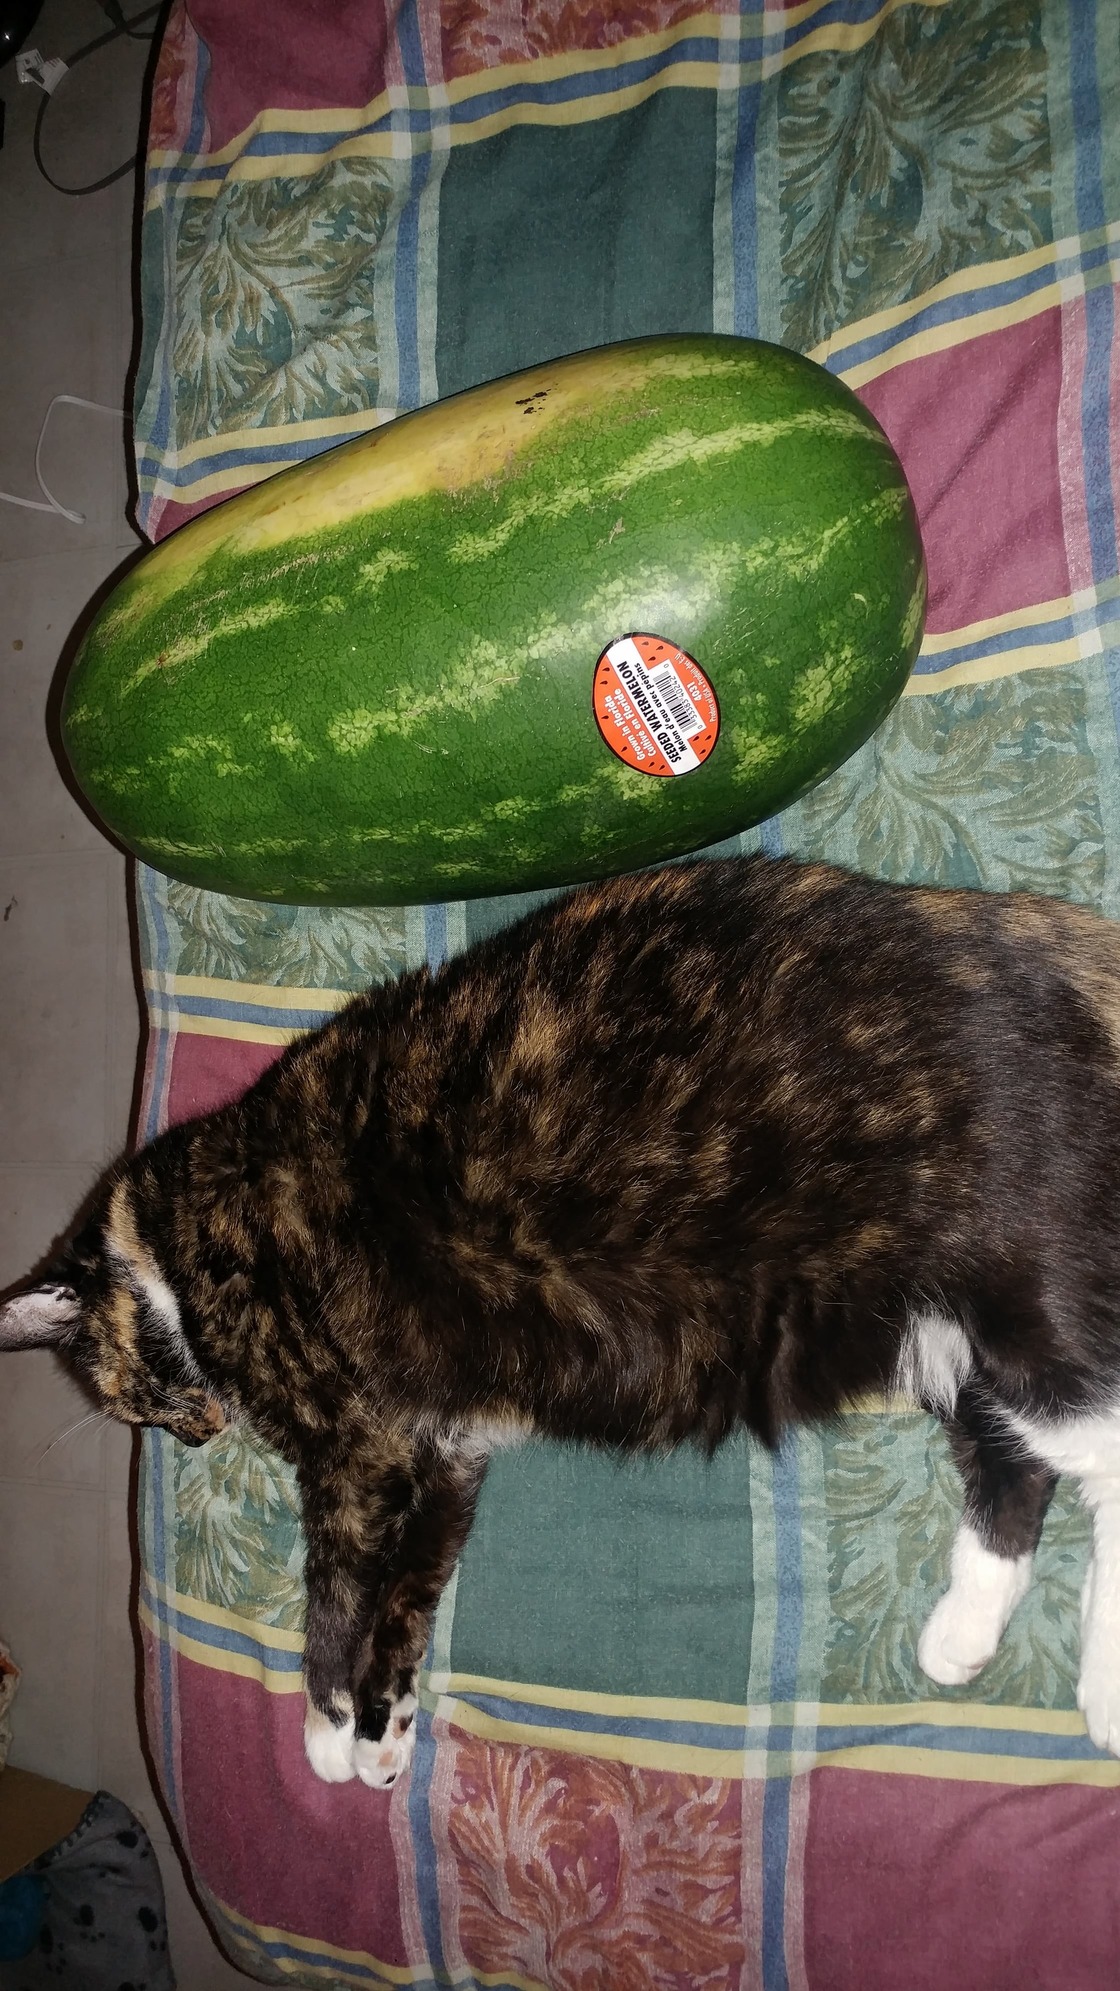 Sheba at 16. her sister passed recently. shes my best friend and then only thing left i care about. jumbo watermelon for scale